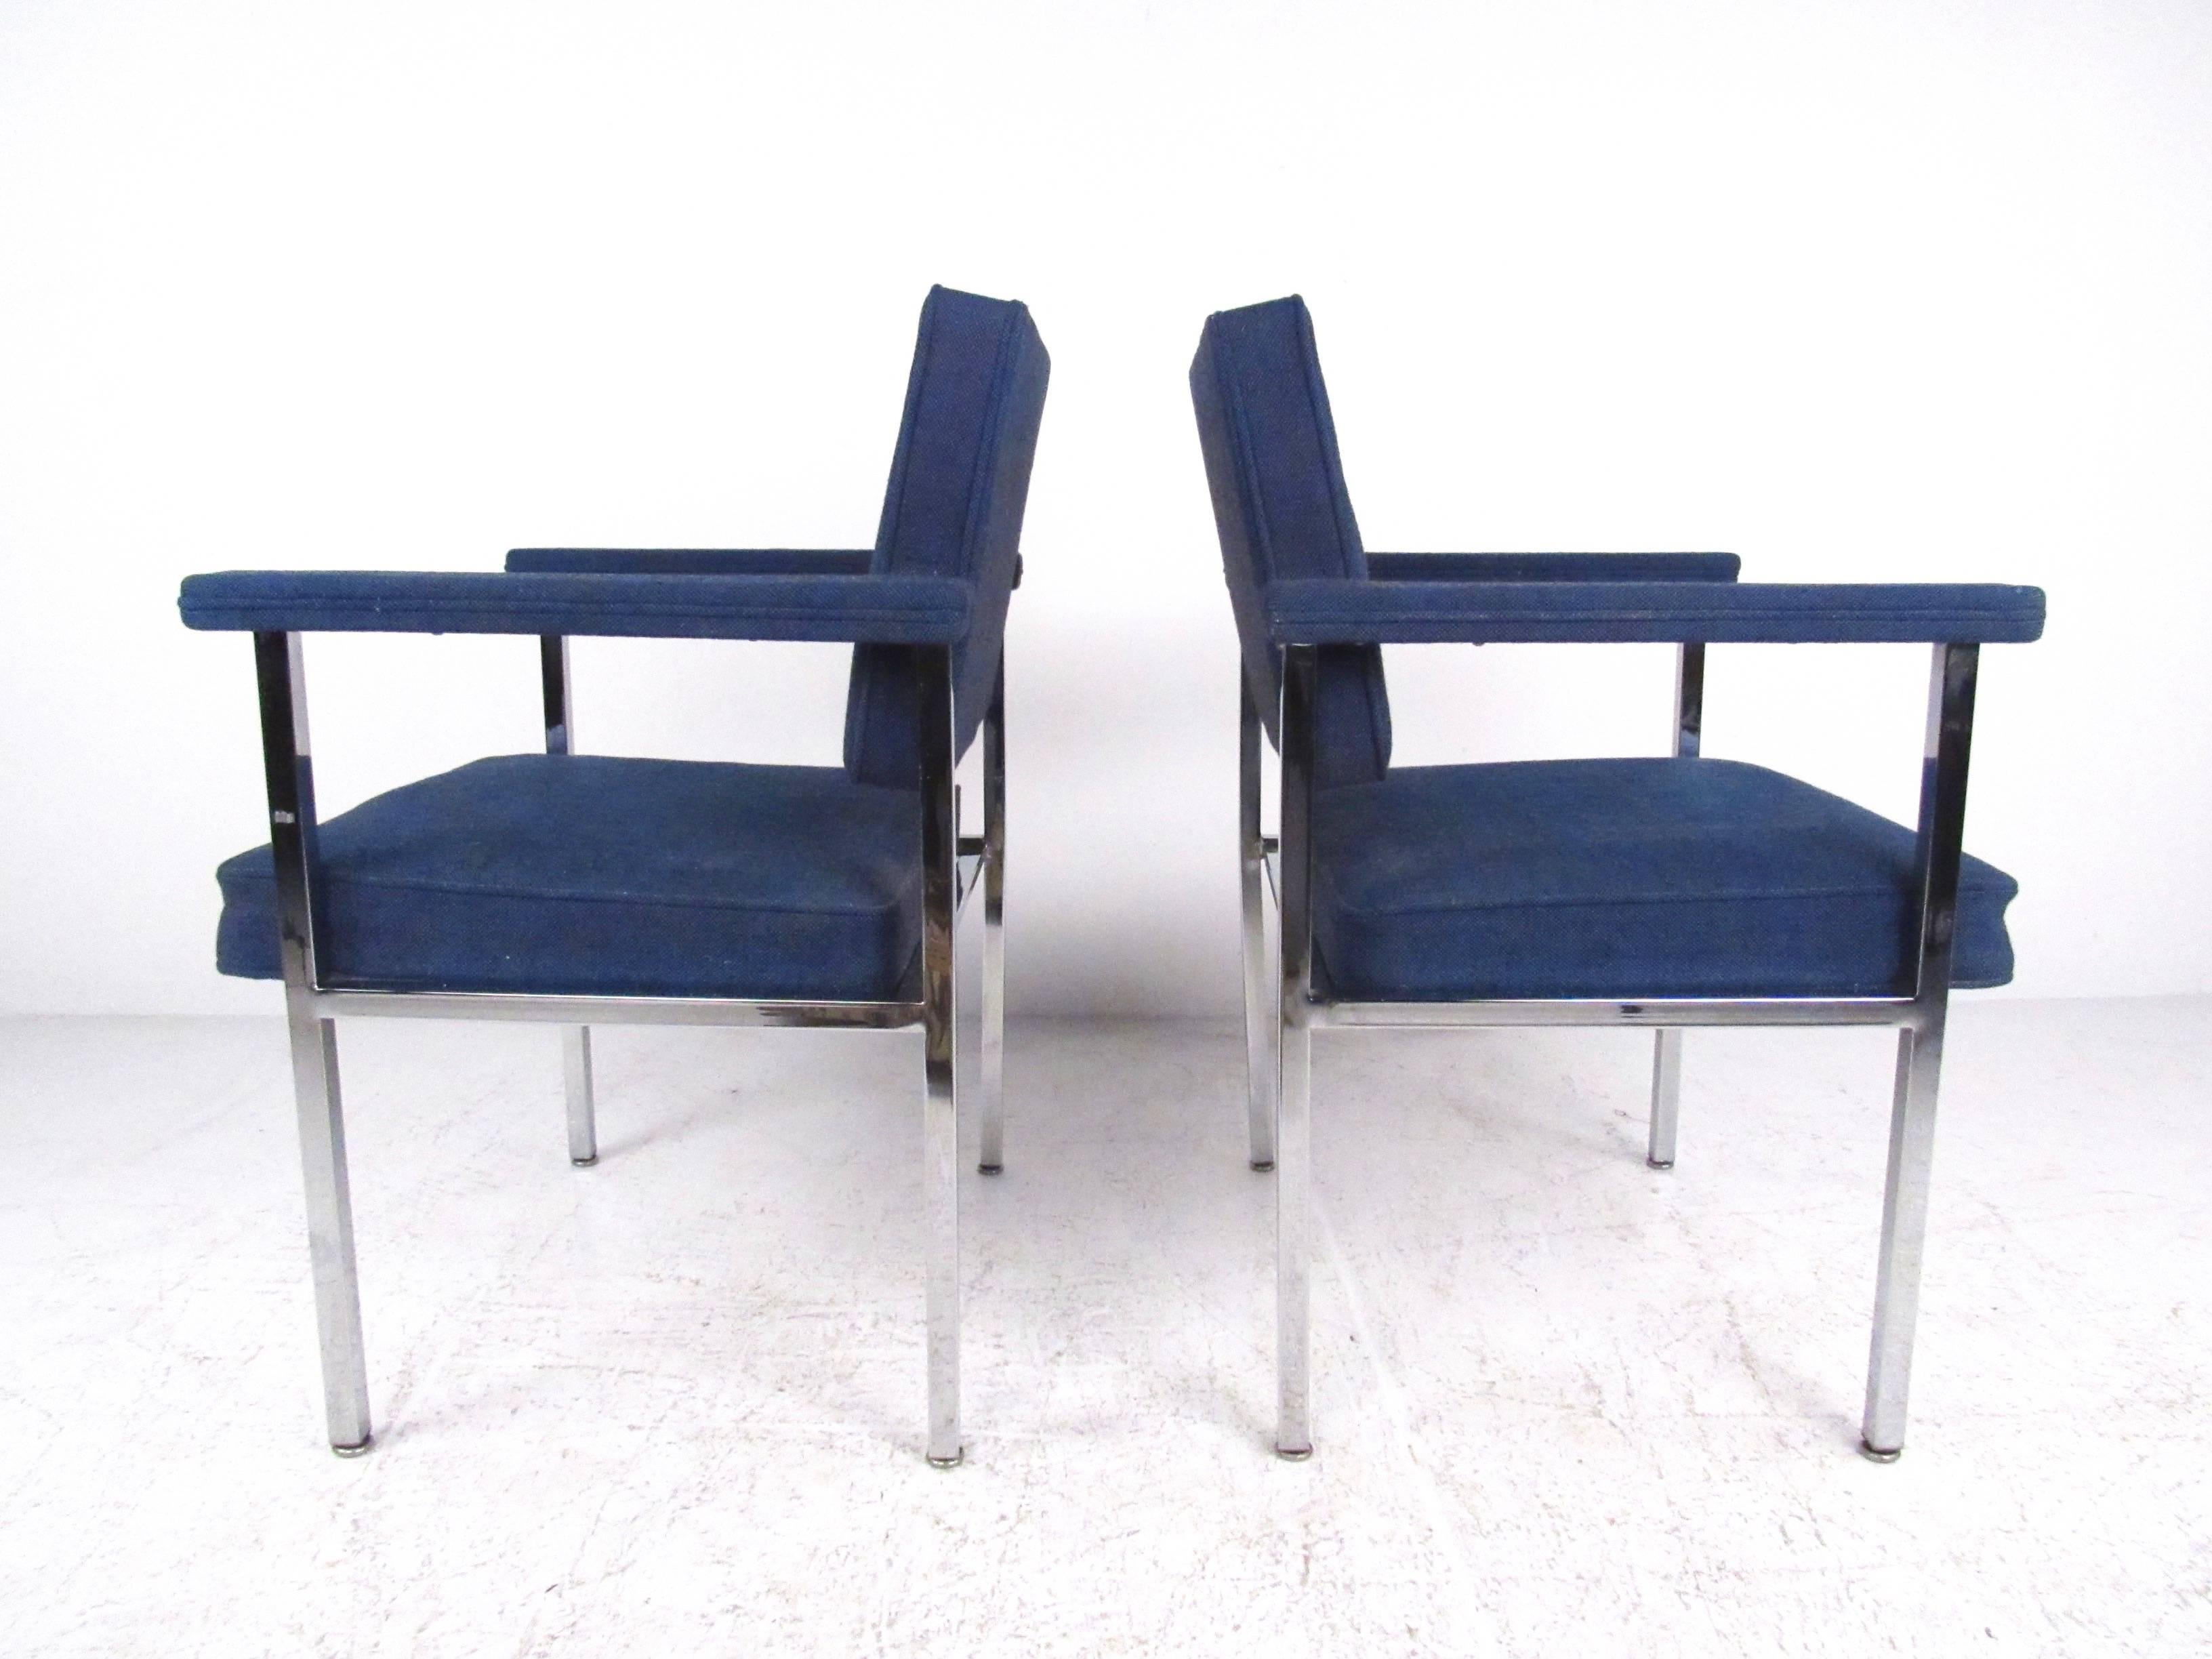 American Pair of Mid-Century Modern Chrome Armchairs For Sale